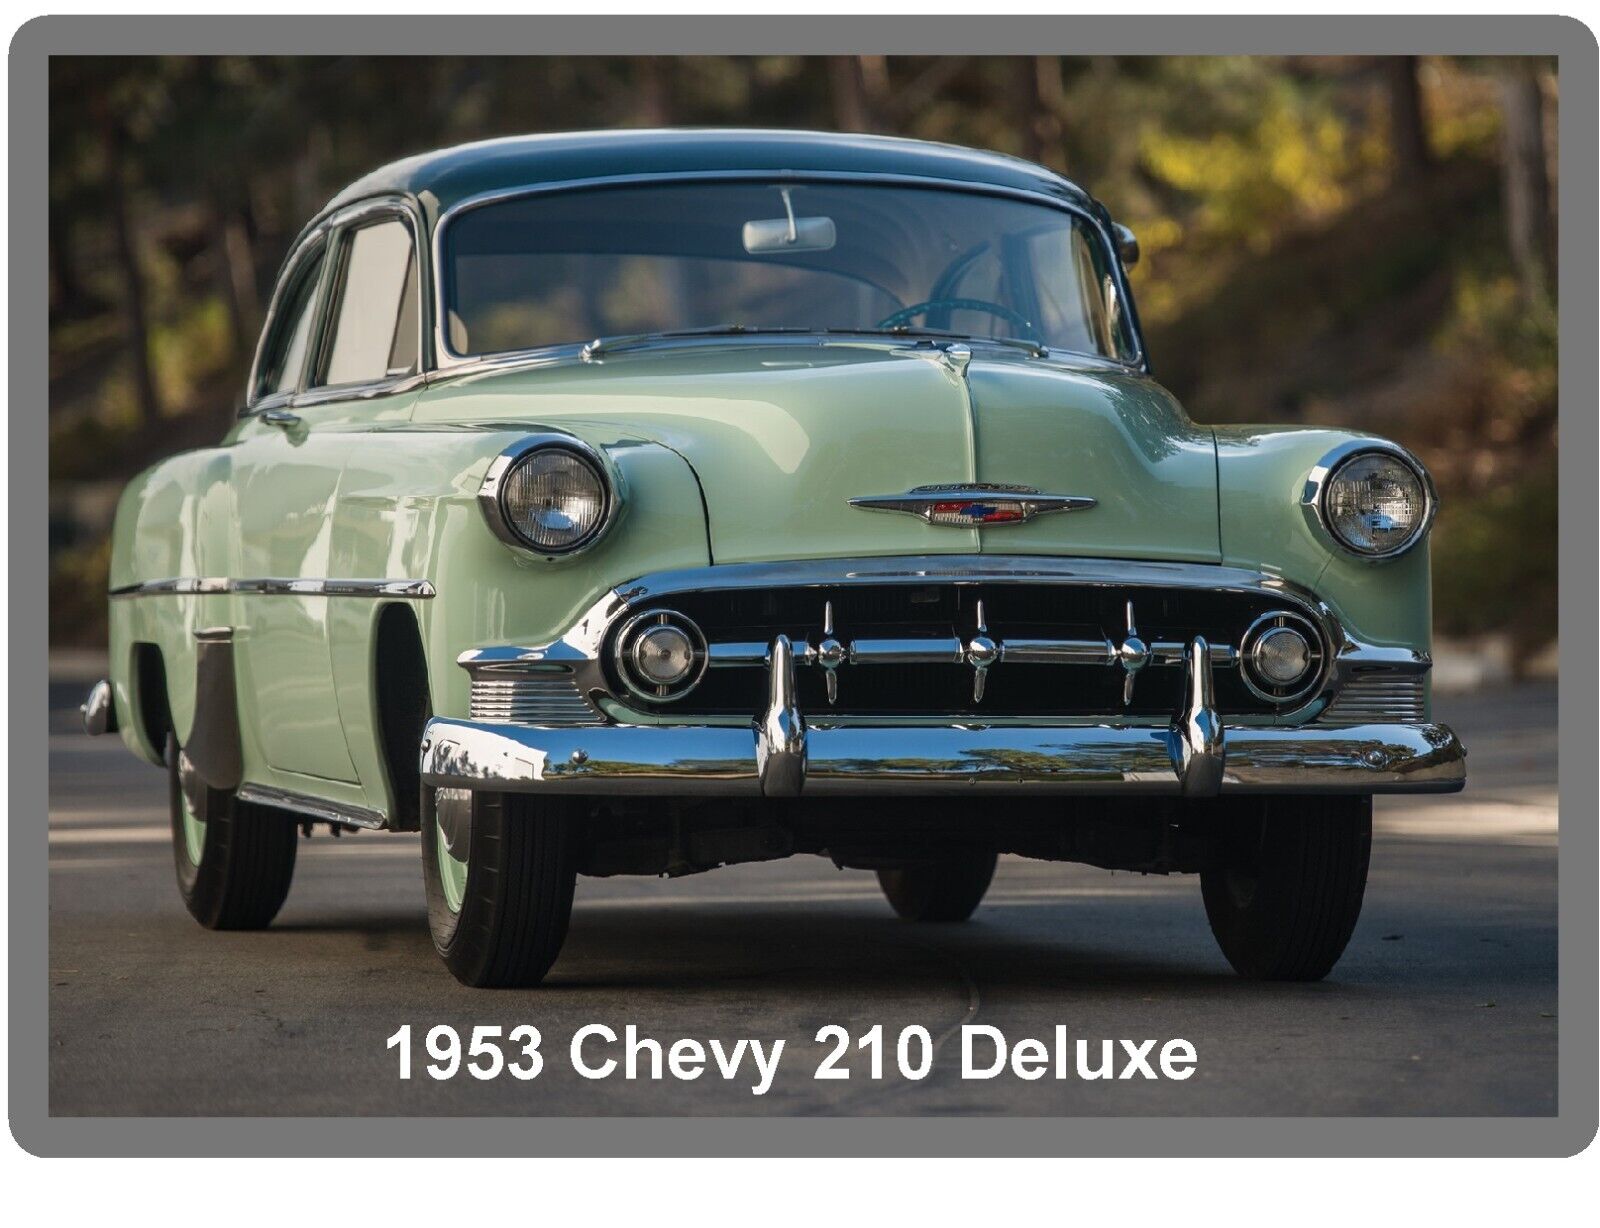 1953 Chevy 210 Deluxe  Auto Refrigerator / Tool Box  Magnet